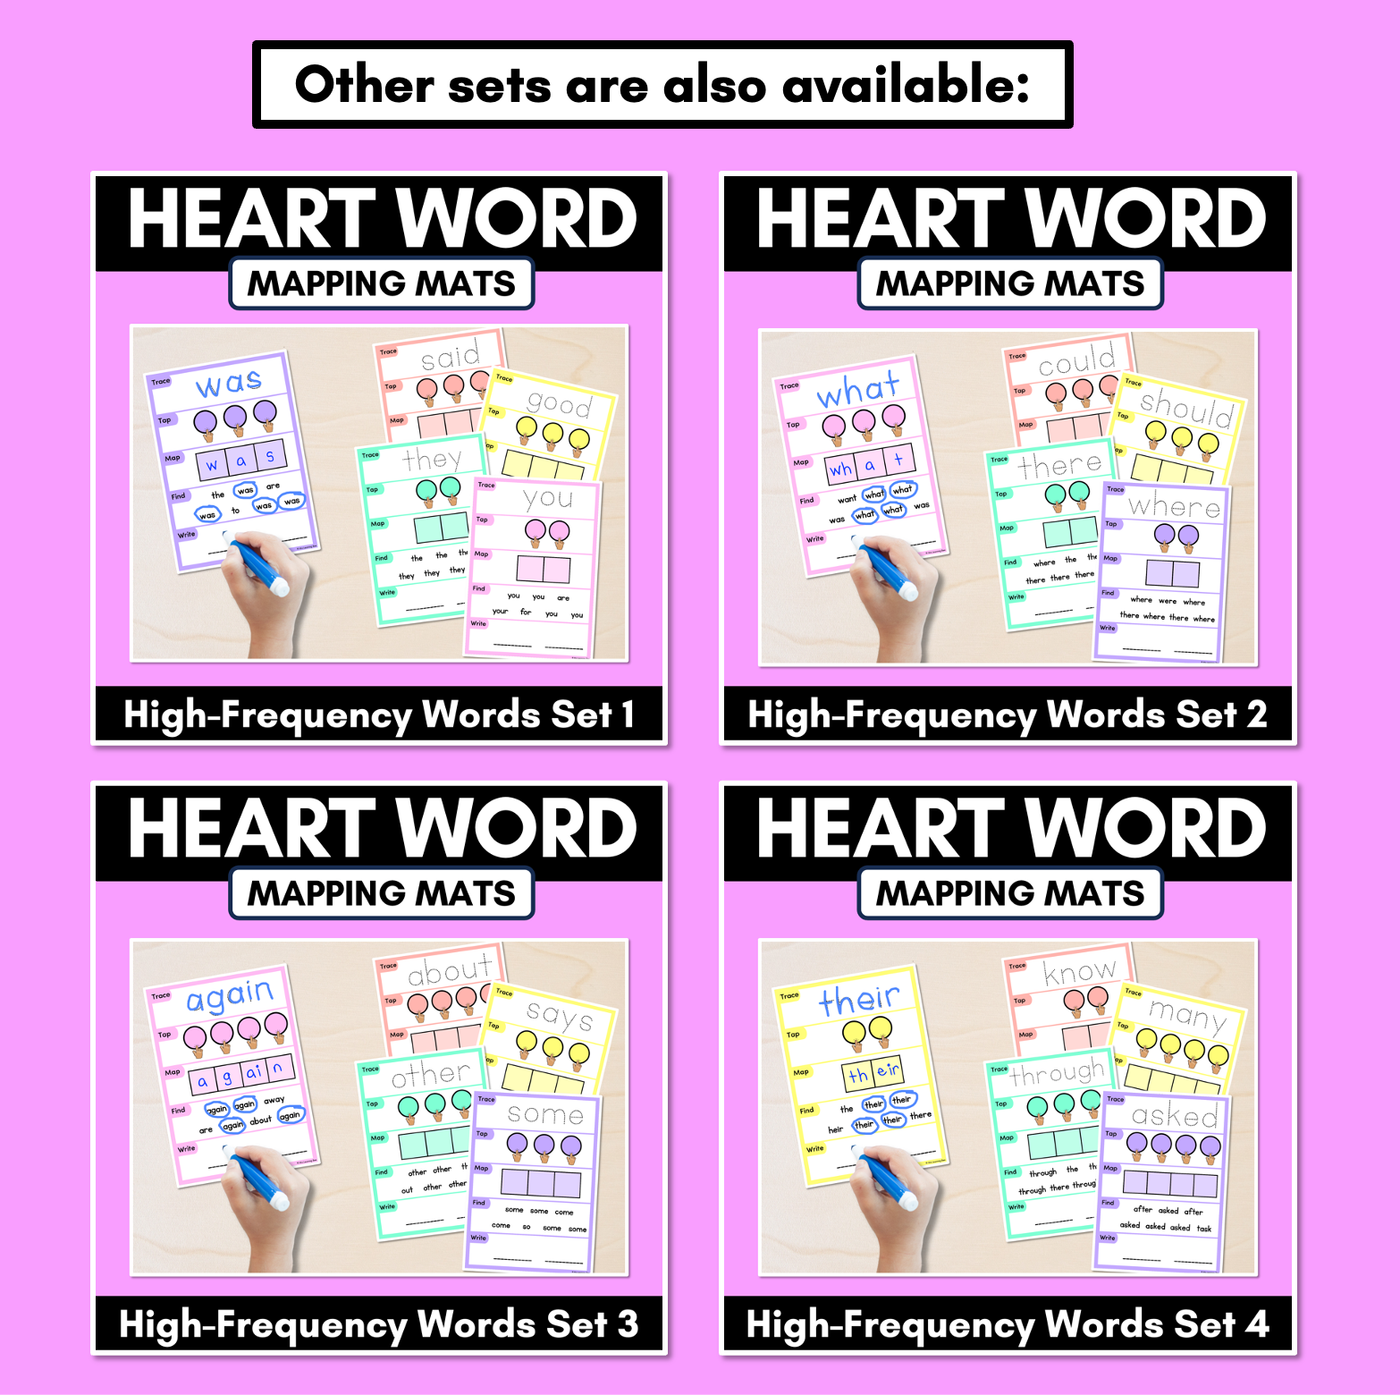 HEART WORD MAPPING MATS - High-Frequency Words - Editable Templates